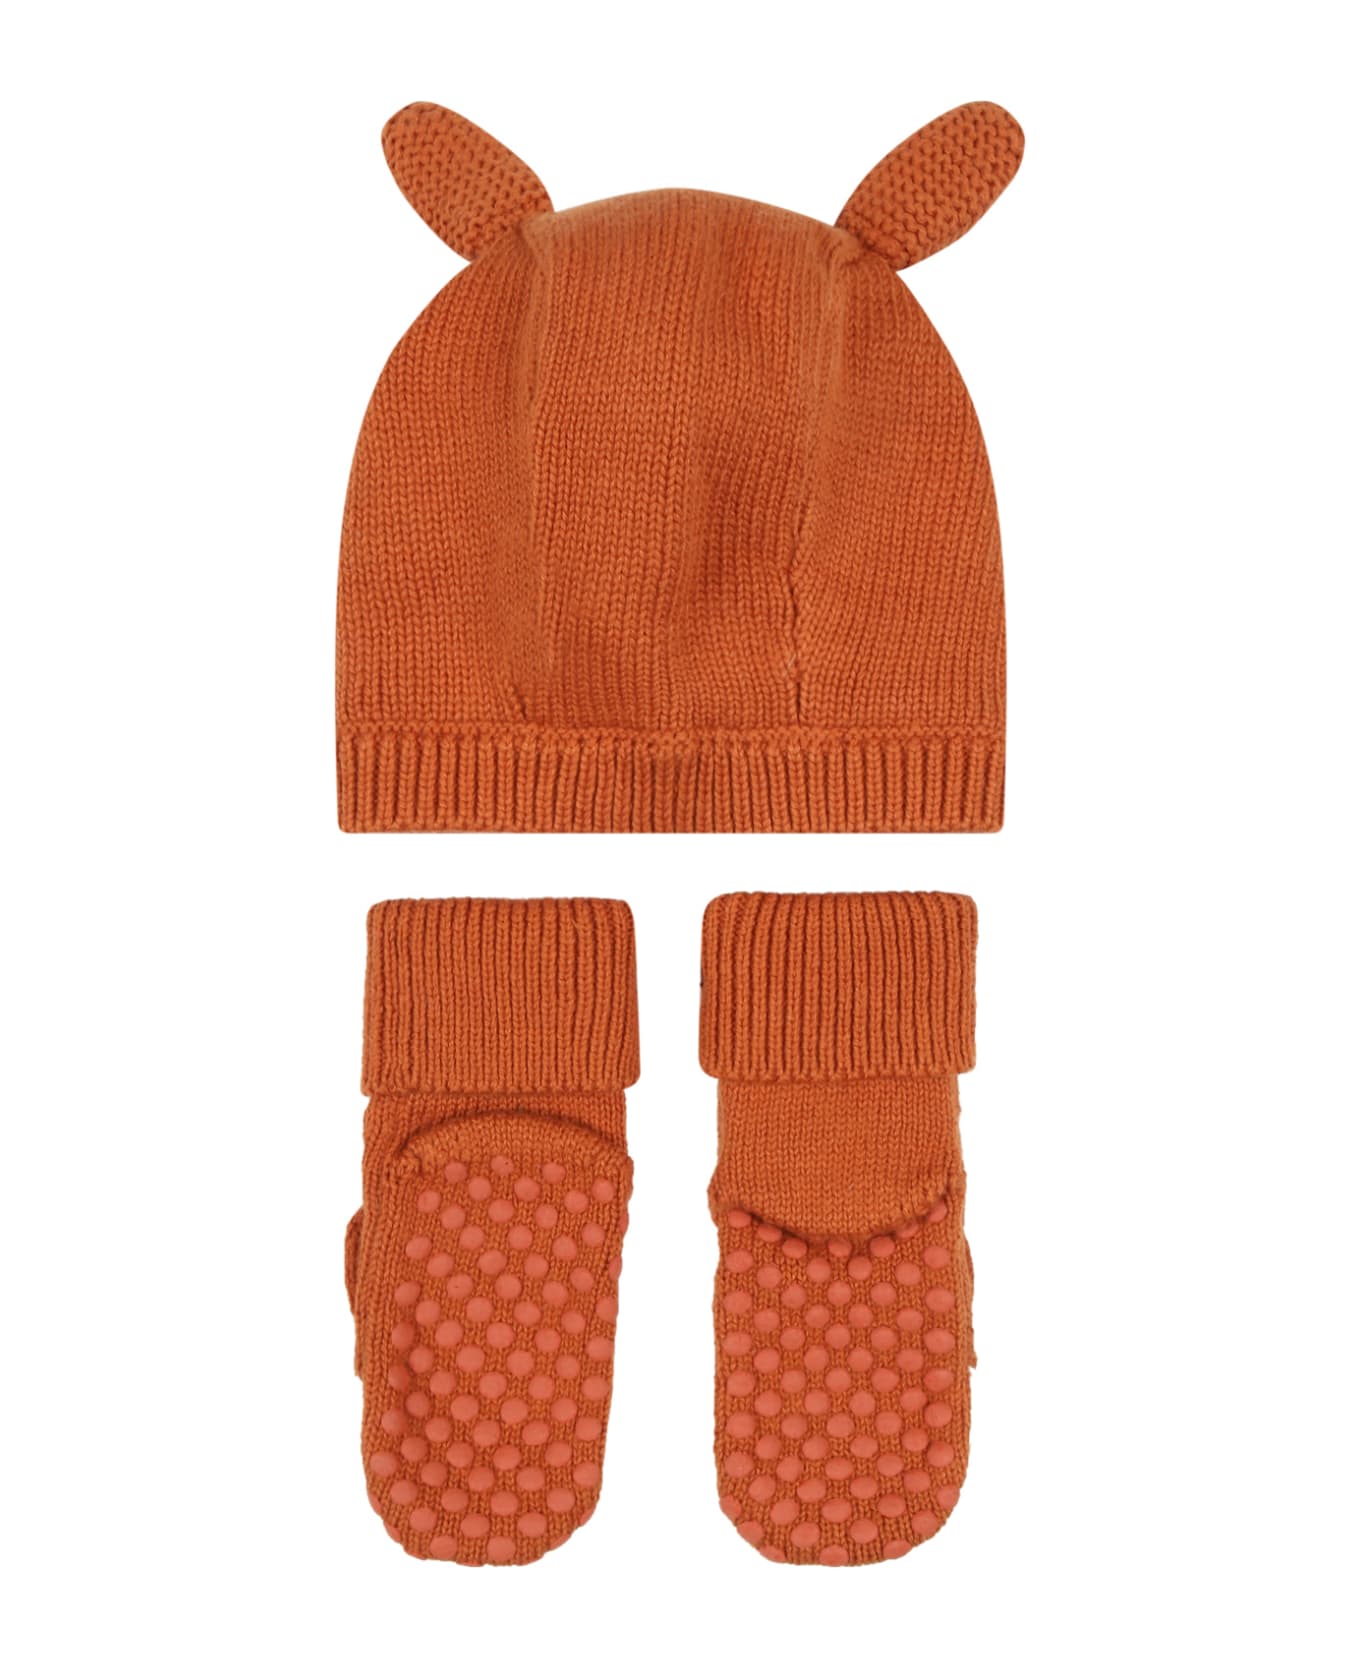 Stella McCartney Kids Brown Set For Baby Boy With Foxes - Brown